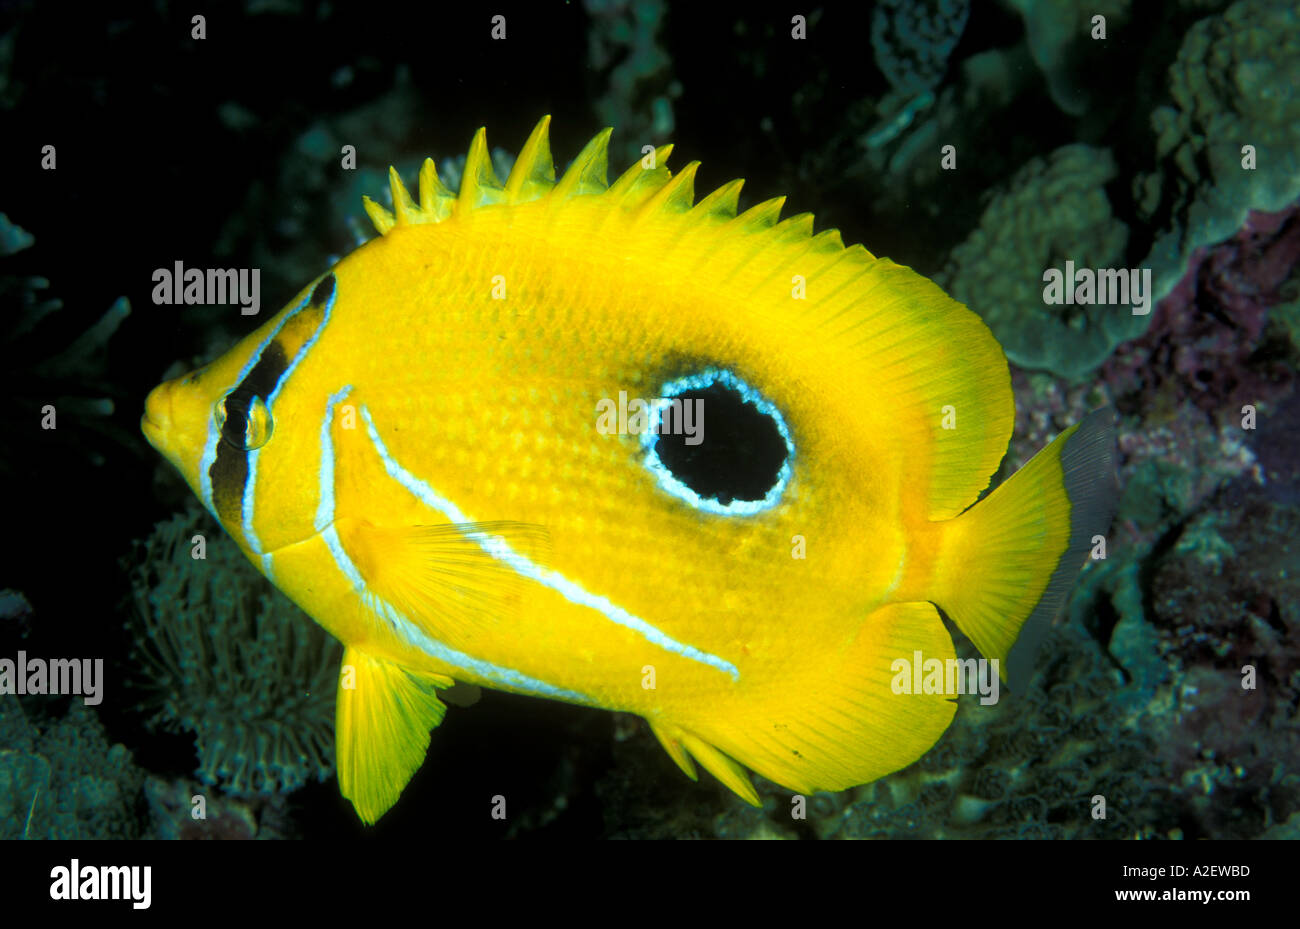 Bennet s butterflyfish Chaetodon bennetti Sulawesi Indonesia Stock Photo